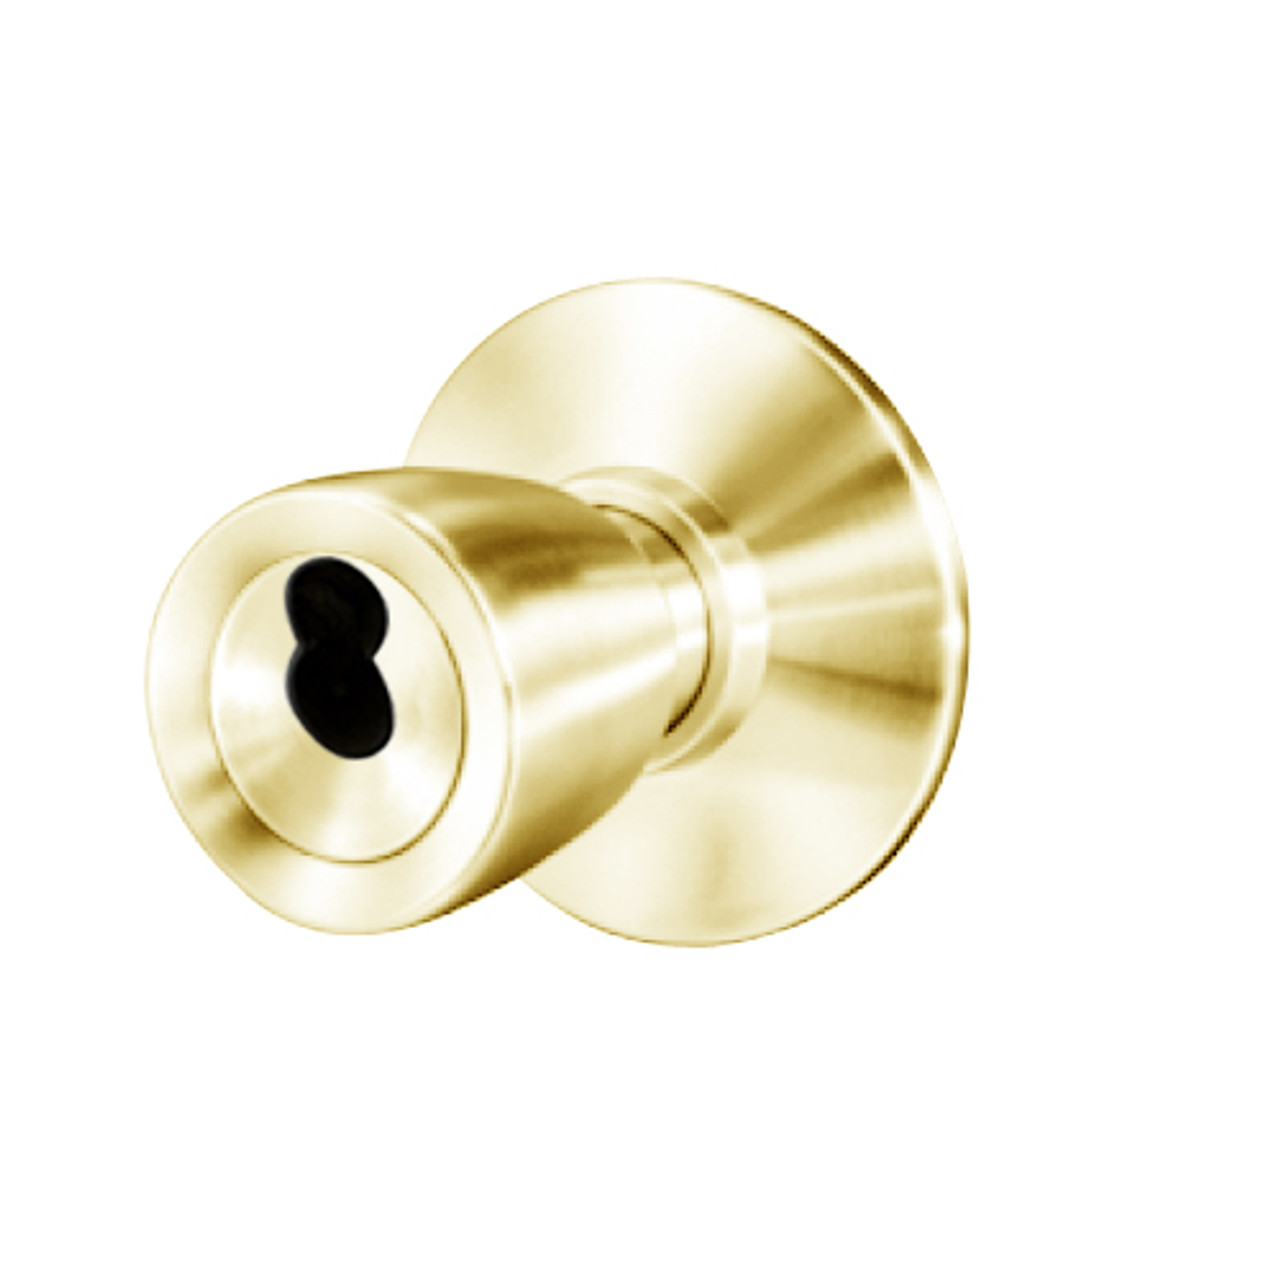 8K37C6DS3605 Best 8K Series Apartment Heavy Duty Cylindrical Knob Locks with Tulip Style in Bright Brass